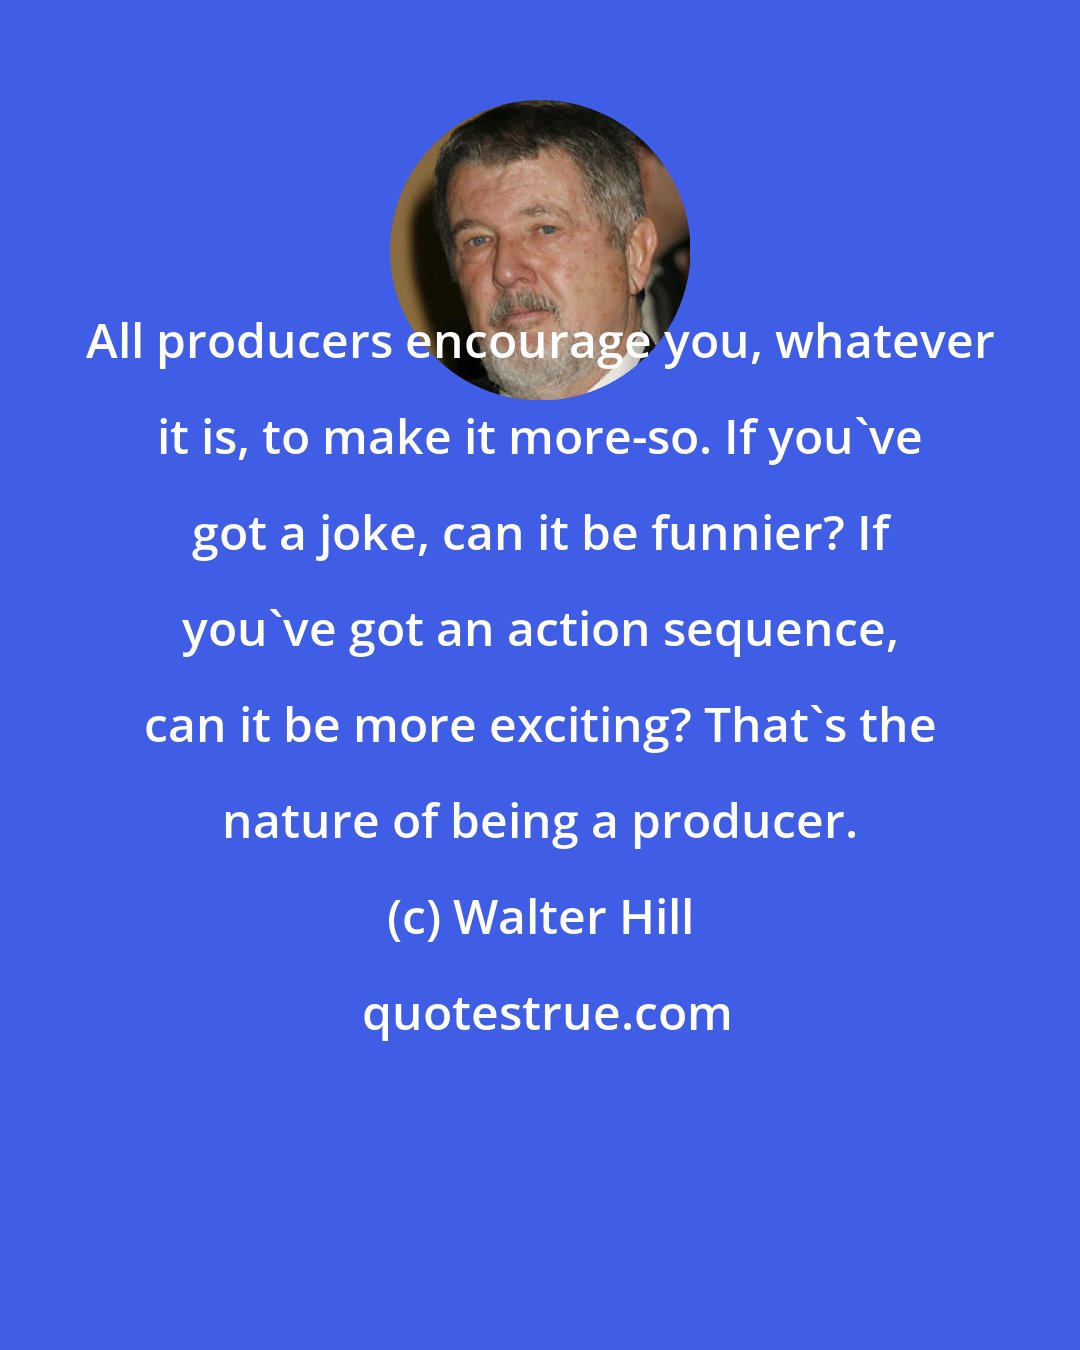 Walter Hill: All producers encourage you, whatever it is, to make it more-so. If you've got a joke, can it be funnier? If you've got an action sequence, can it be more exciting? That's the nature of being a producer.